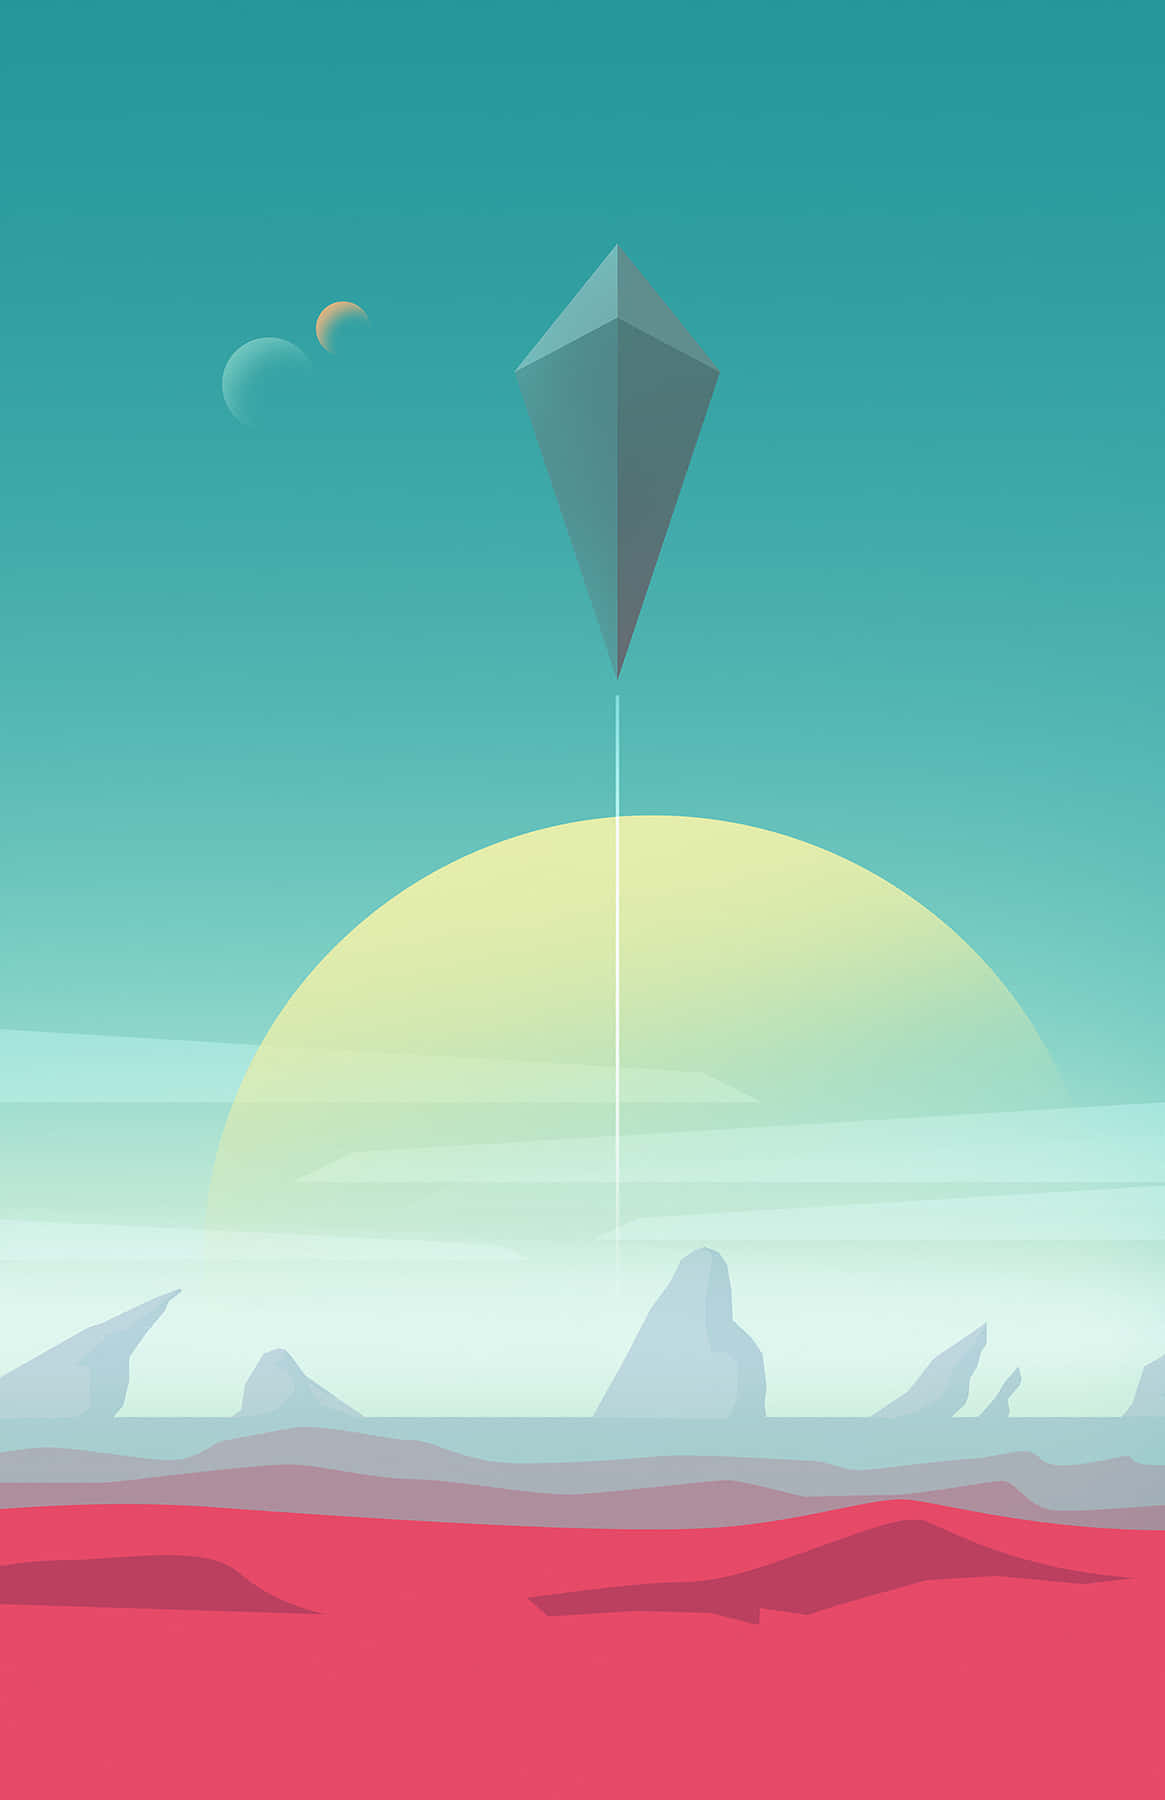 A Kite Flying Over A Deserted Area Wallpaper